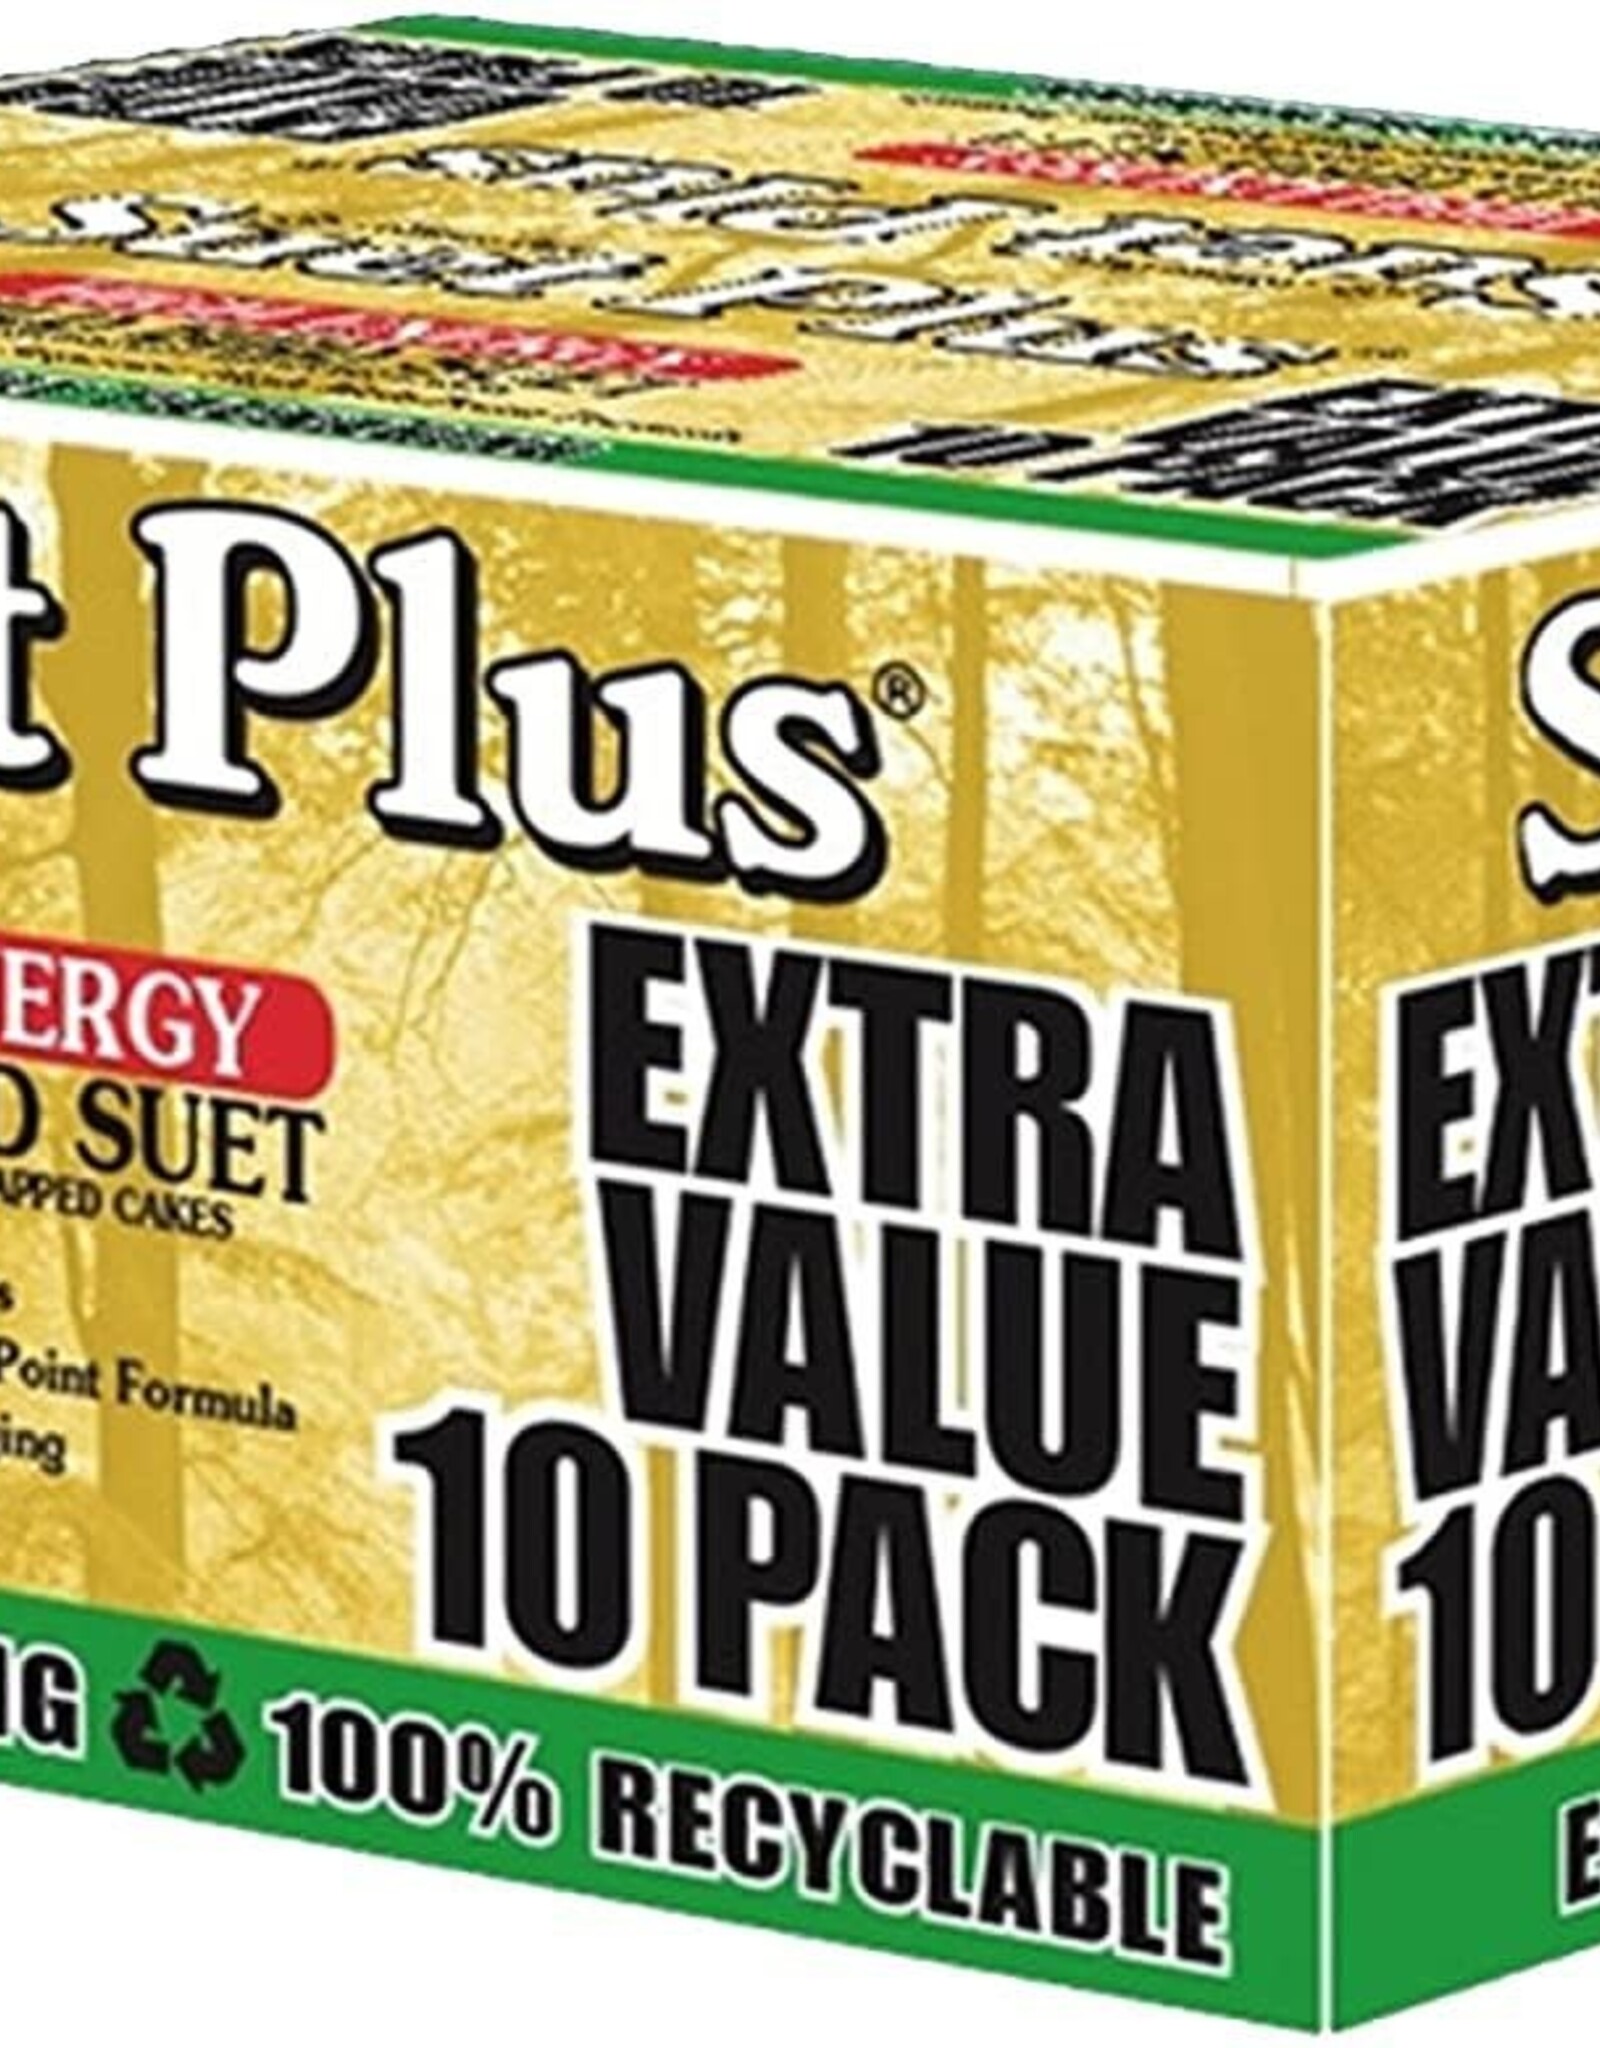 SUET PLUS HIGH ENERGY EXTRA VALUE 10 PACK